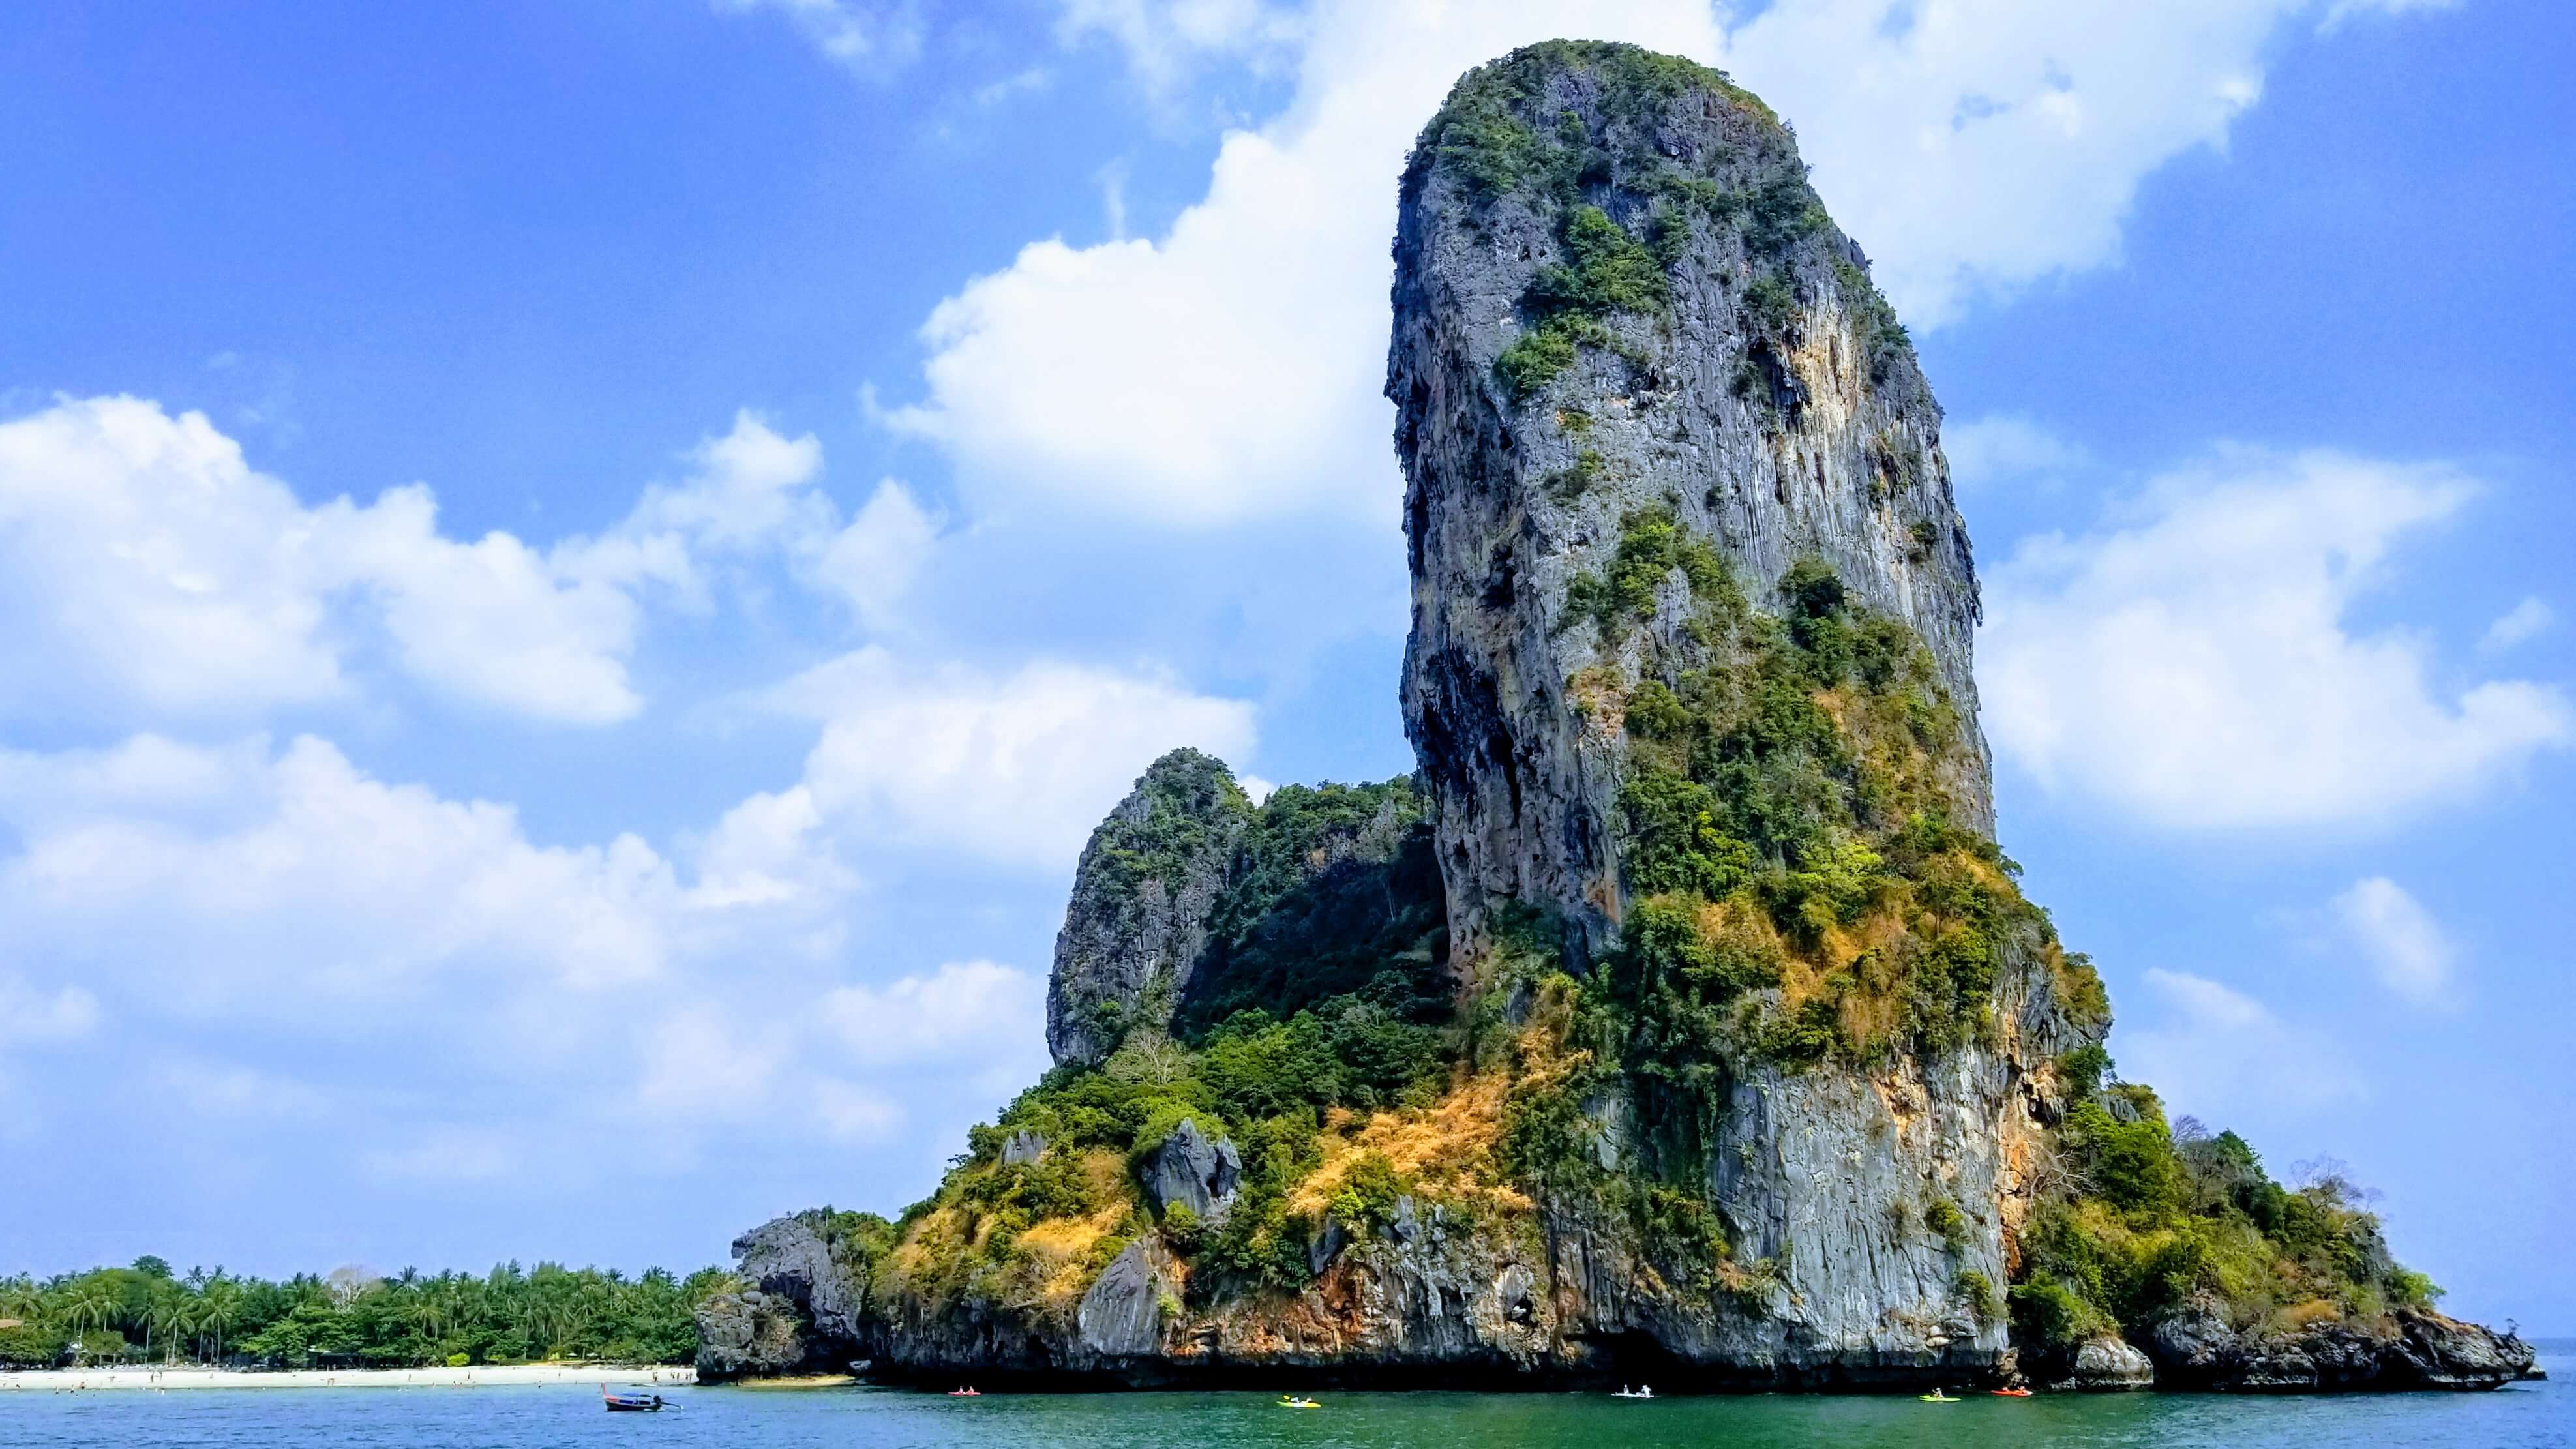 Large limestone rock formations jutting out of the Andaman Sea called karsts near Railay Beach.